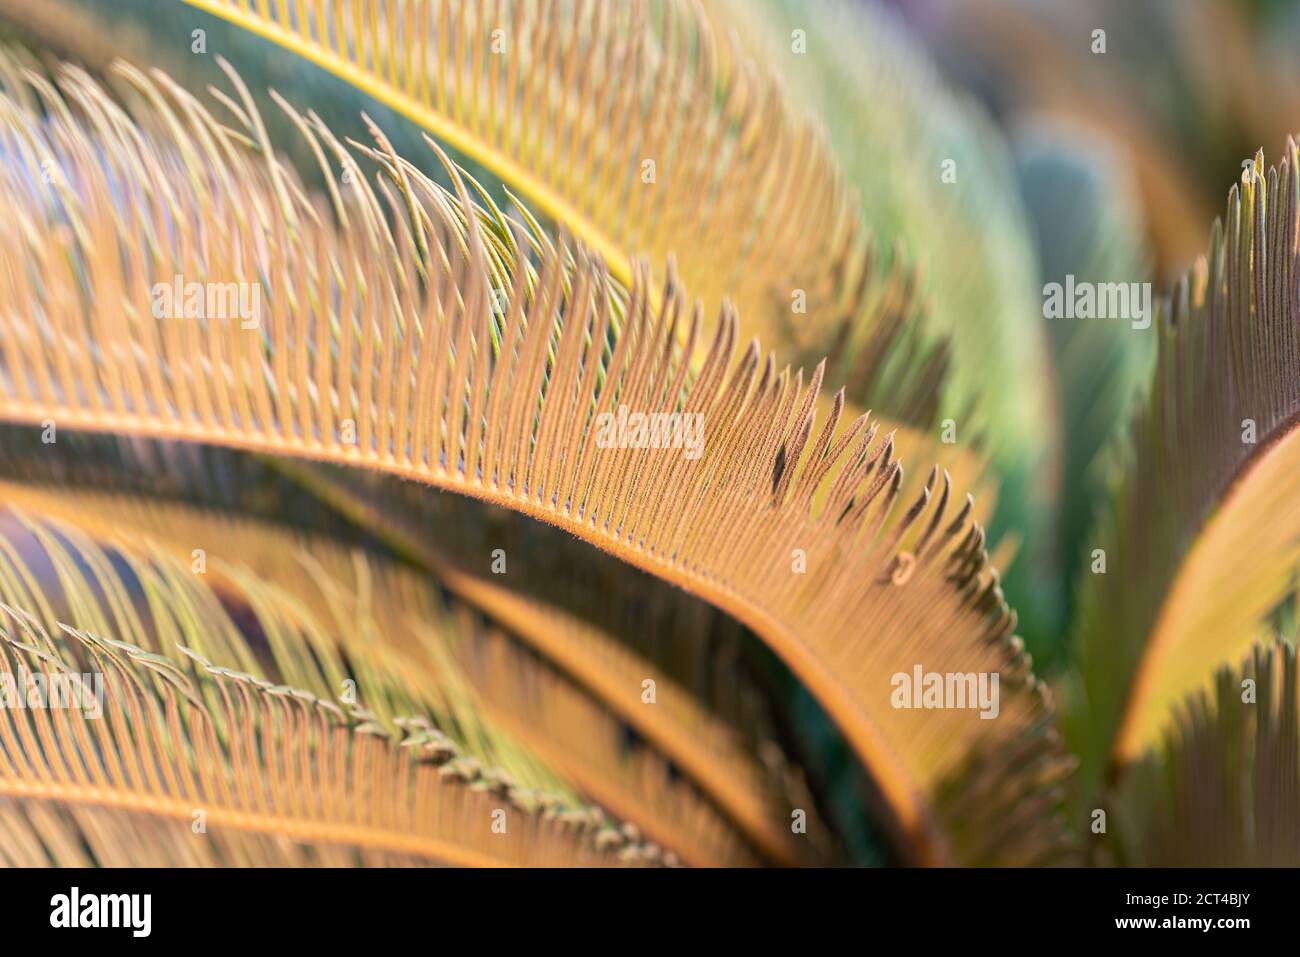 Green and yellow palm tree leaves in bright sunshine, autumn day. Abstract nature blurred background. Stock Photo